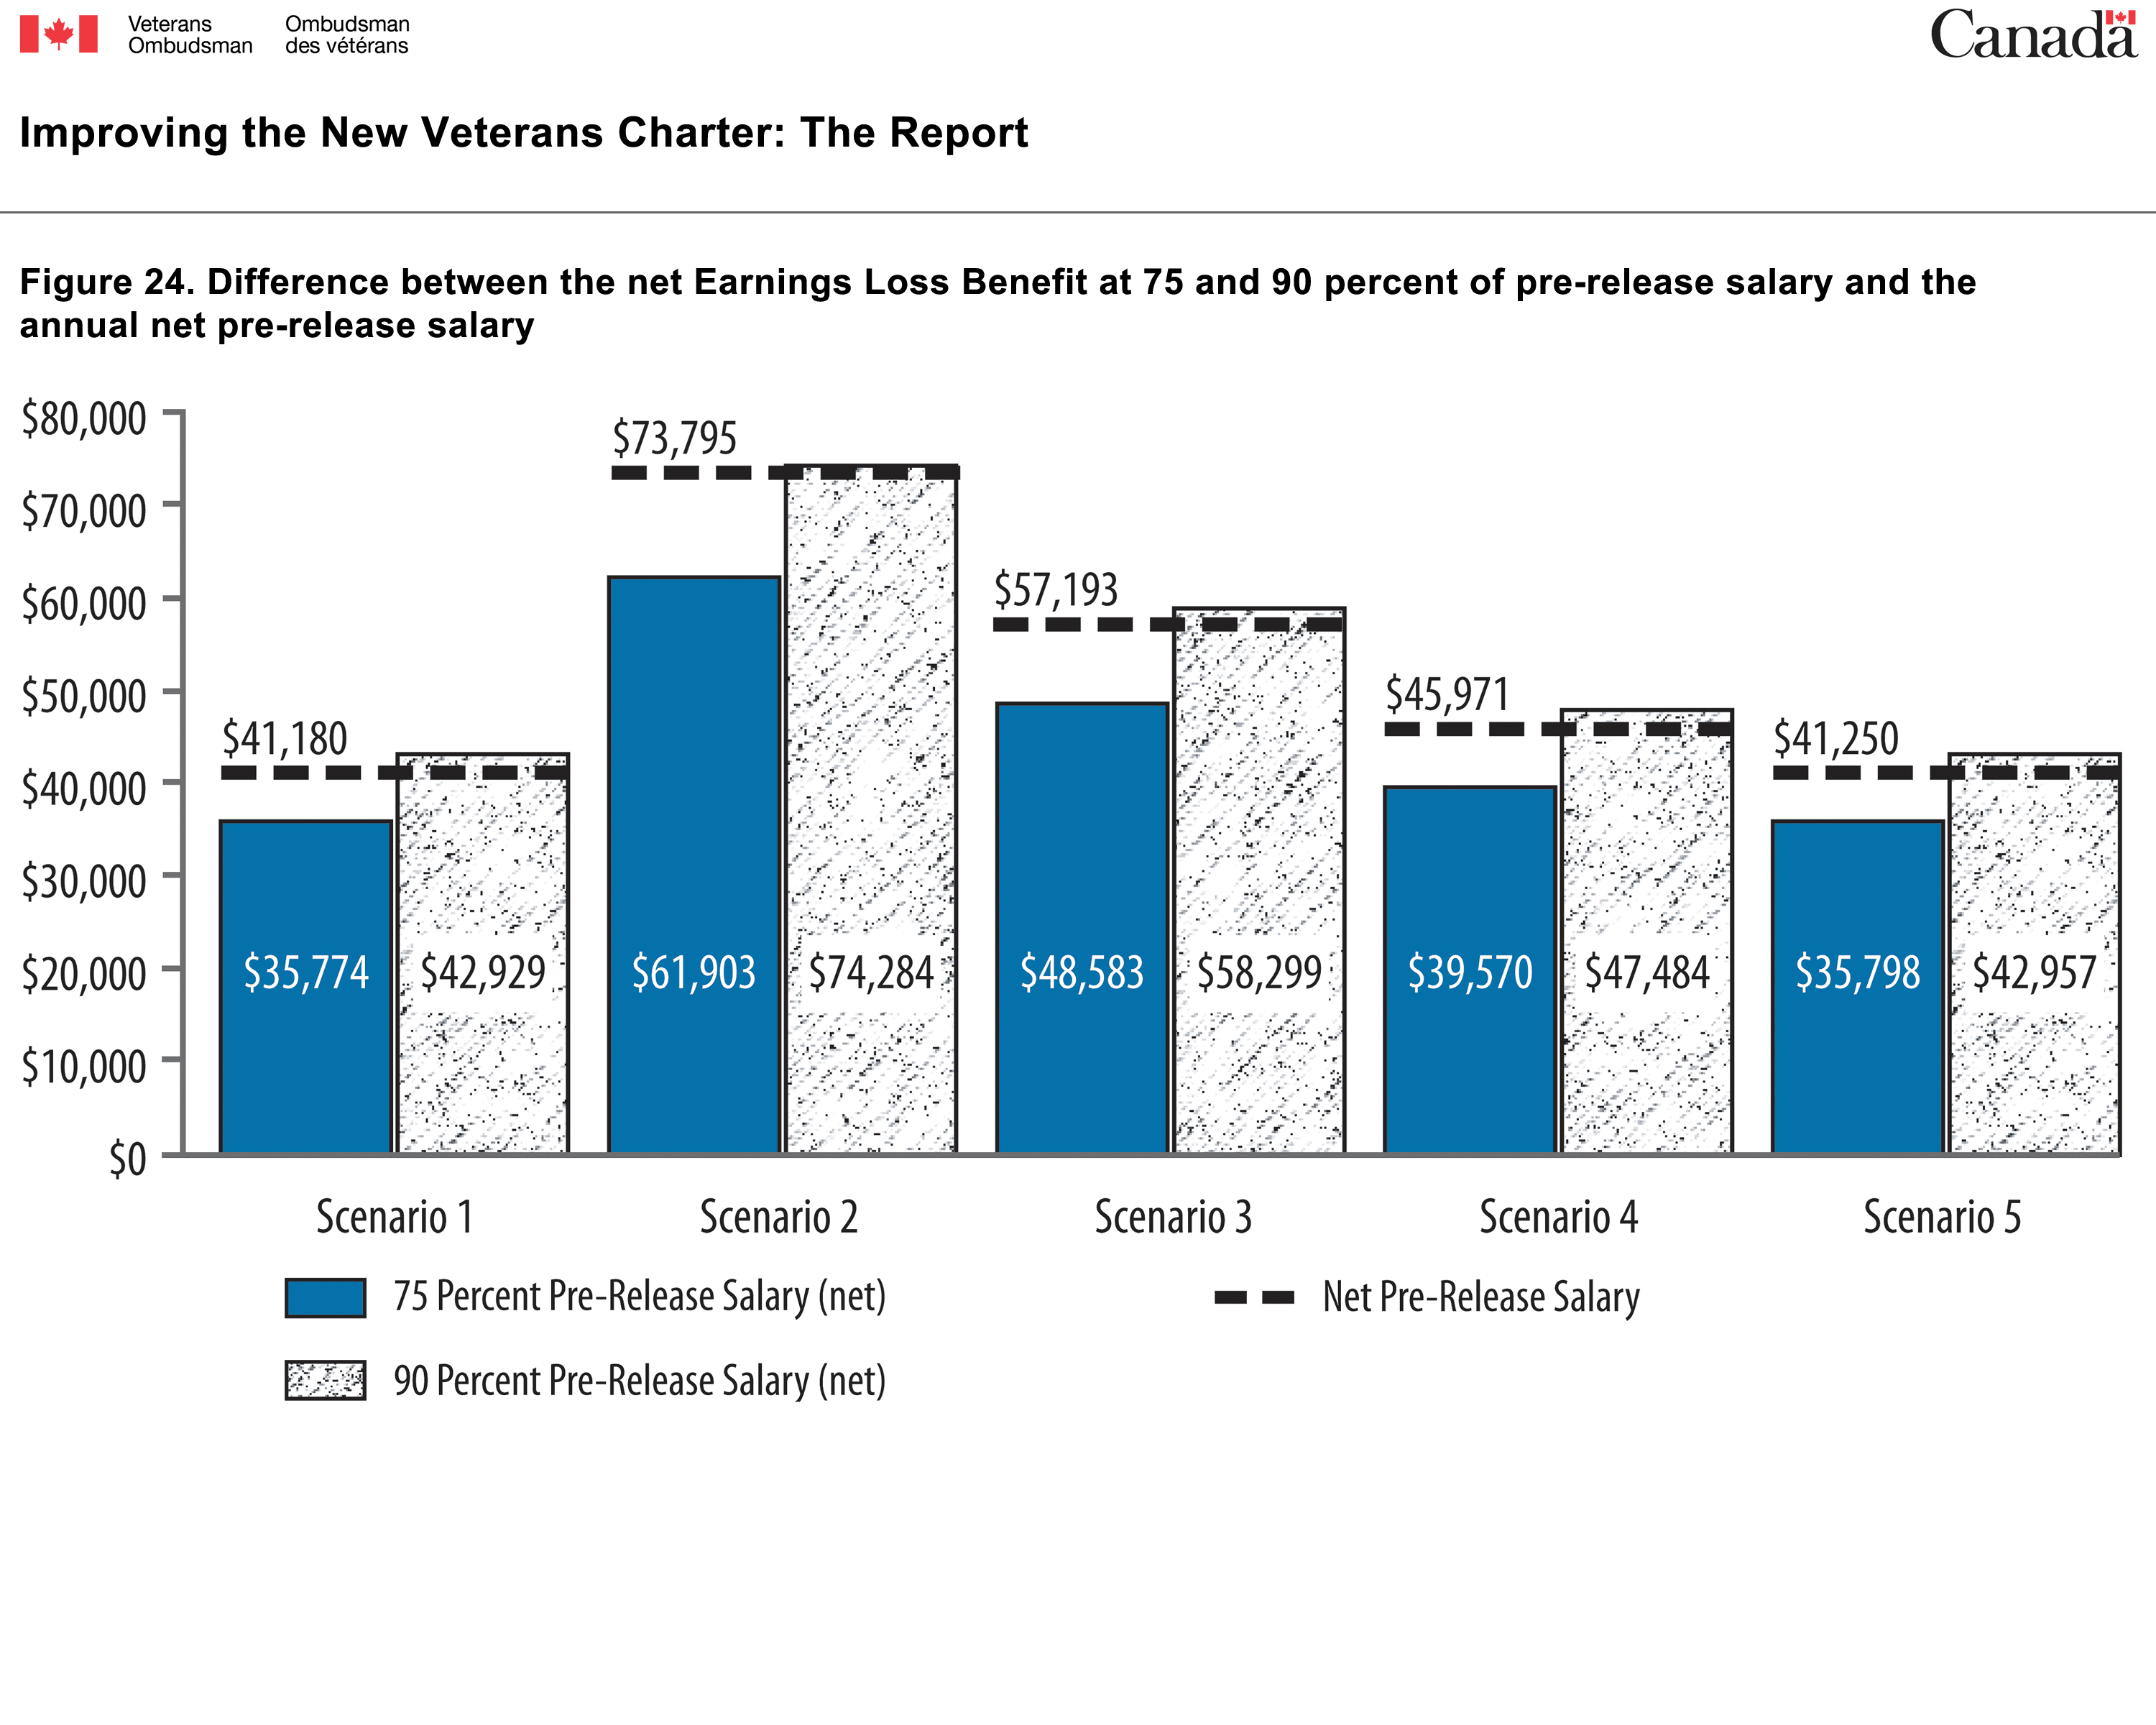 Figure  24. Difference between the net Earnings Loss Benefit at 75 and 90 percent of  pre-release salary and the annual net pre-release salary